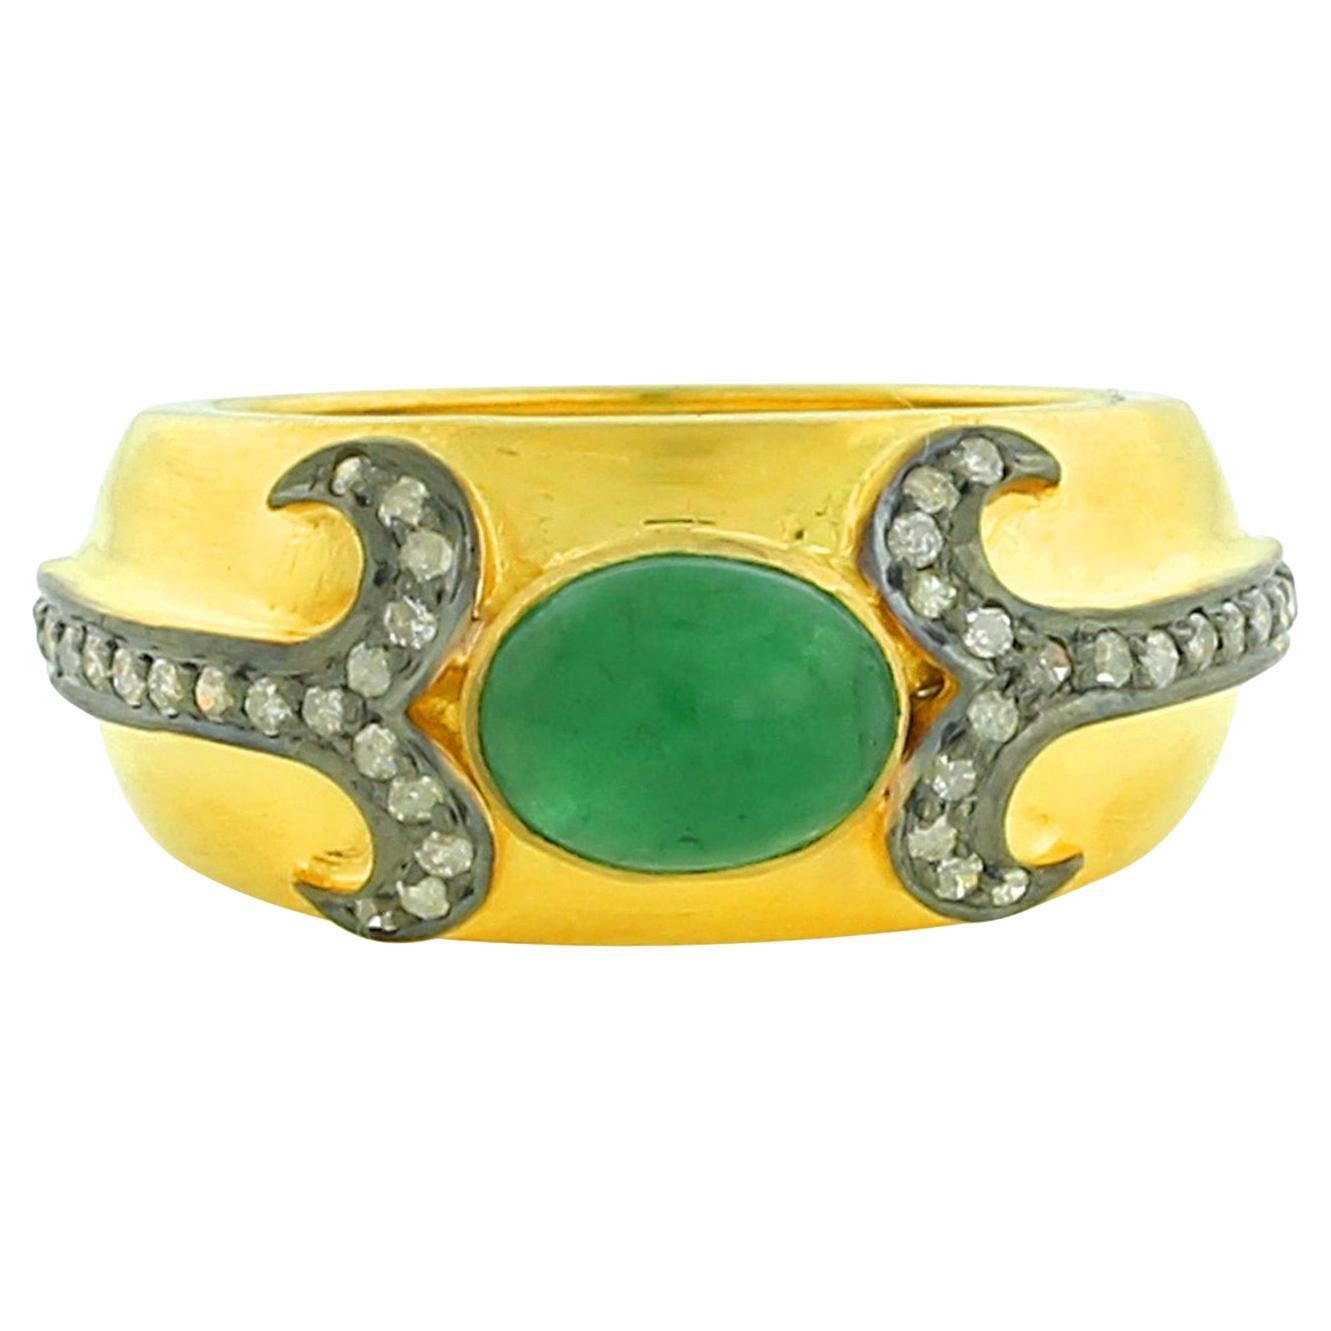 Center Stone Emerald Ring With Diamonds Made In 18k Yellow Gold